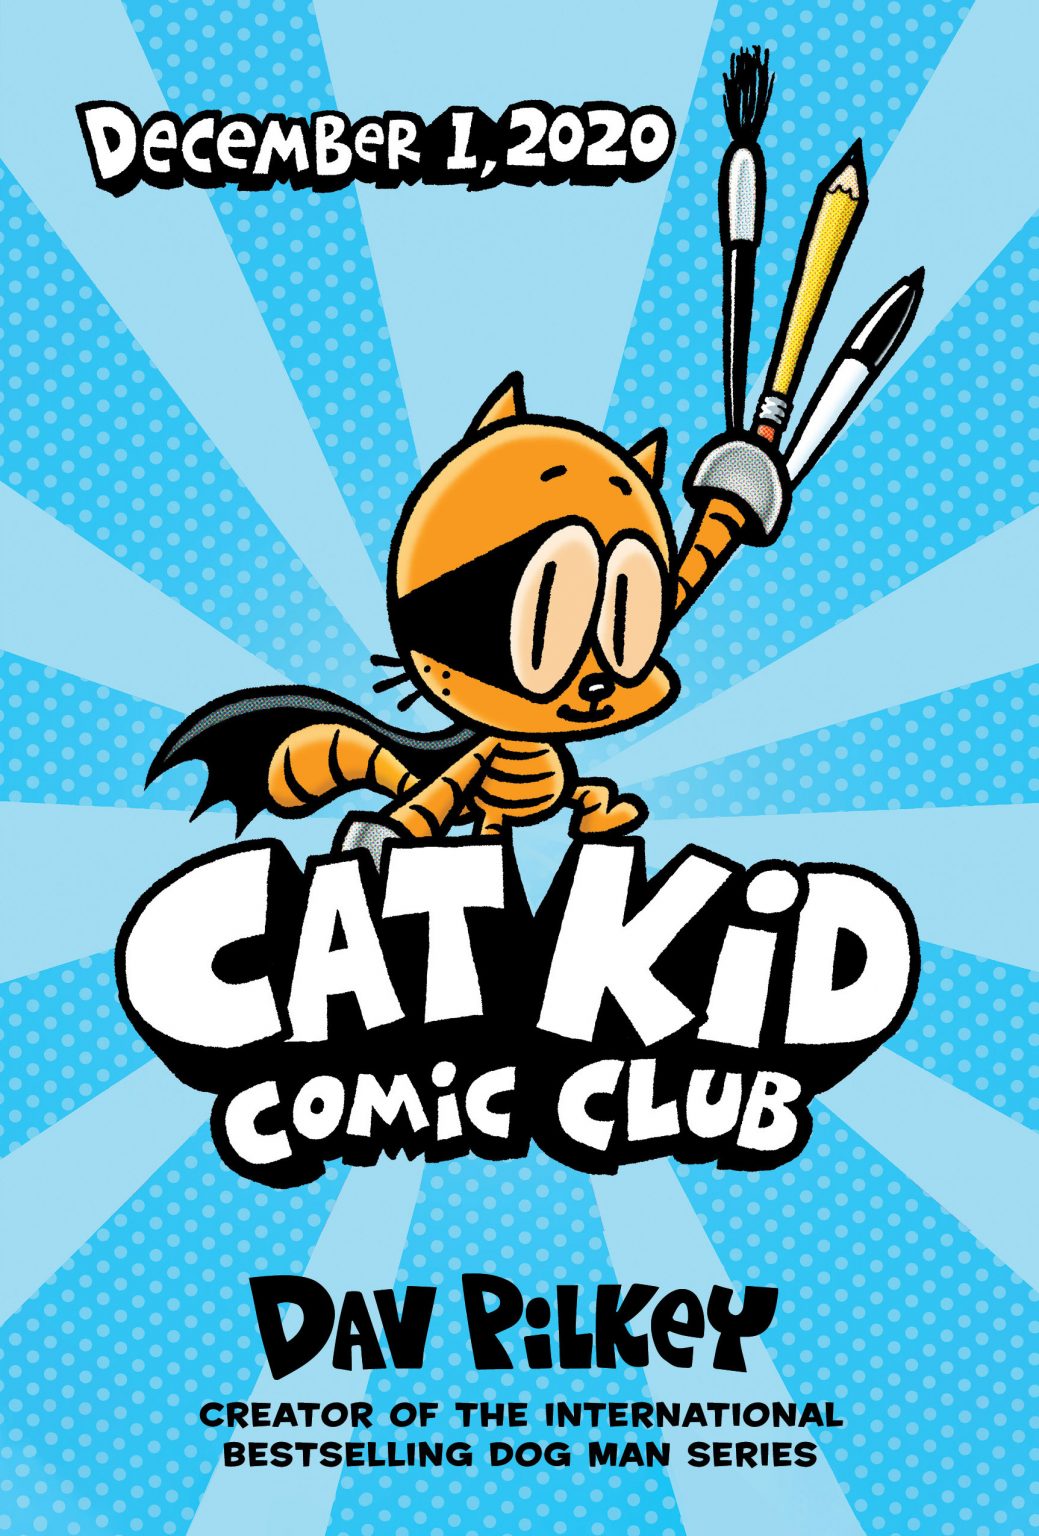 “CAT KID COMIC CLUB” AN ALLNEW GRAPHIC NOVEL SERIES BY AUTHOR AND